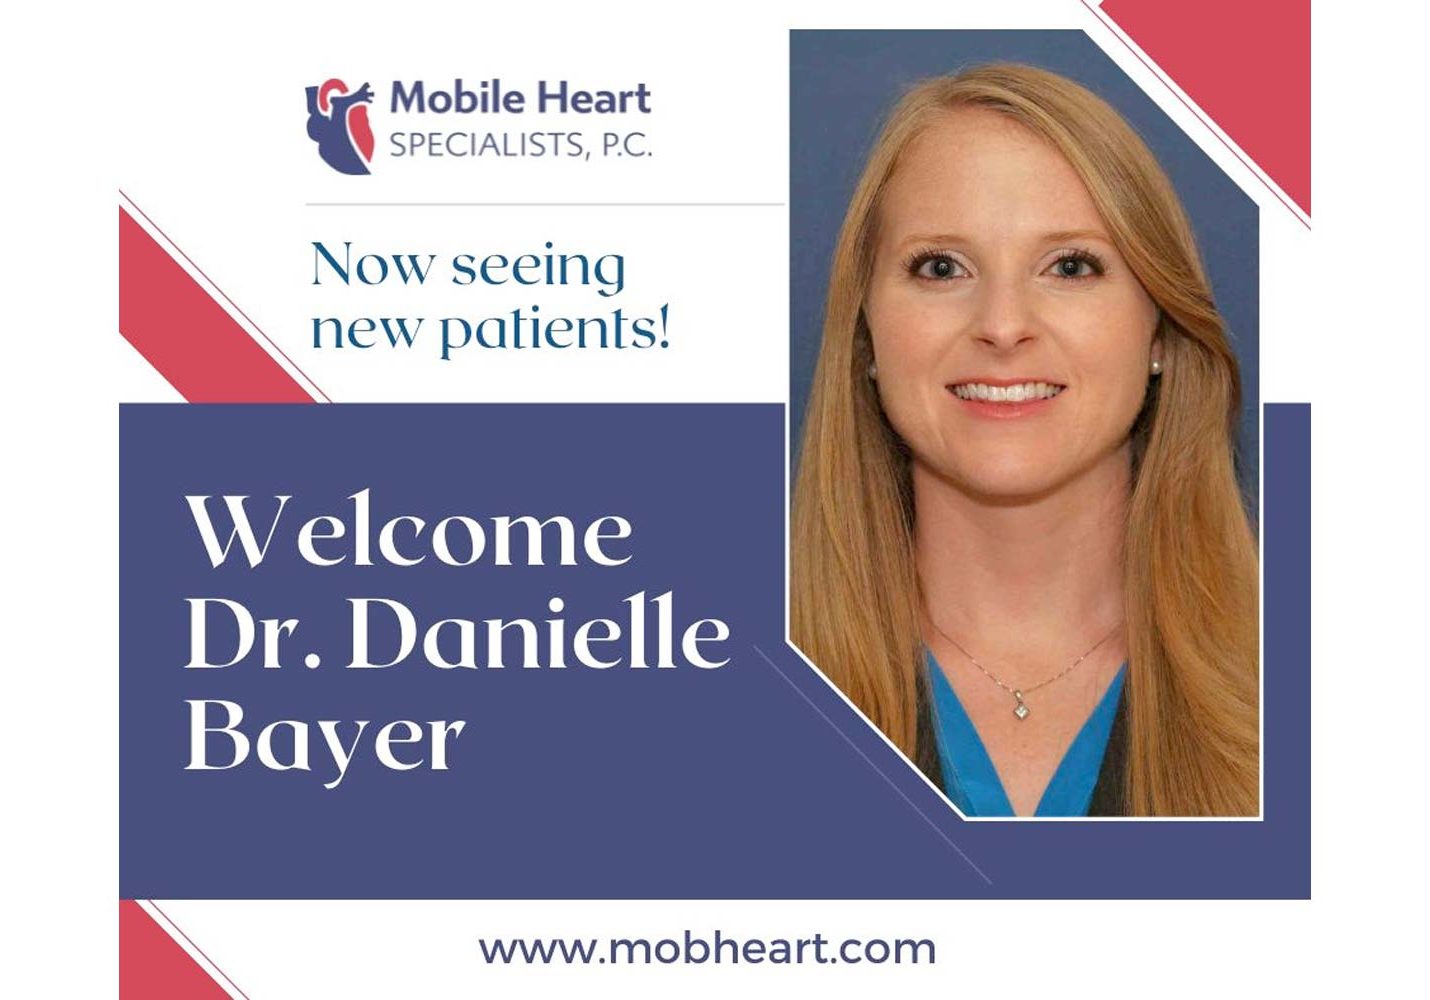 Bayer Joins Mobile Heart Specialists